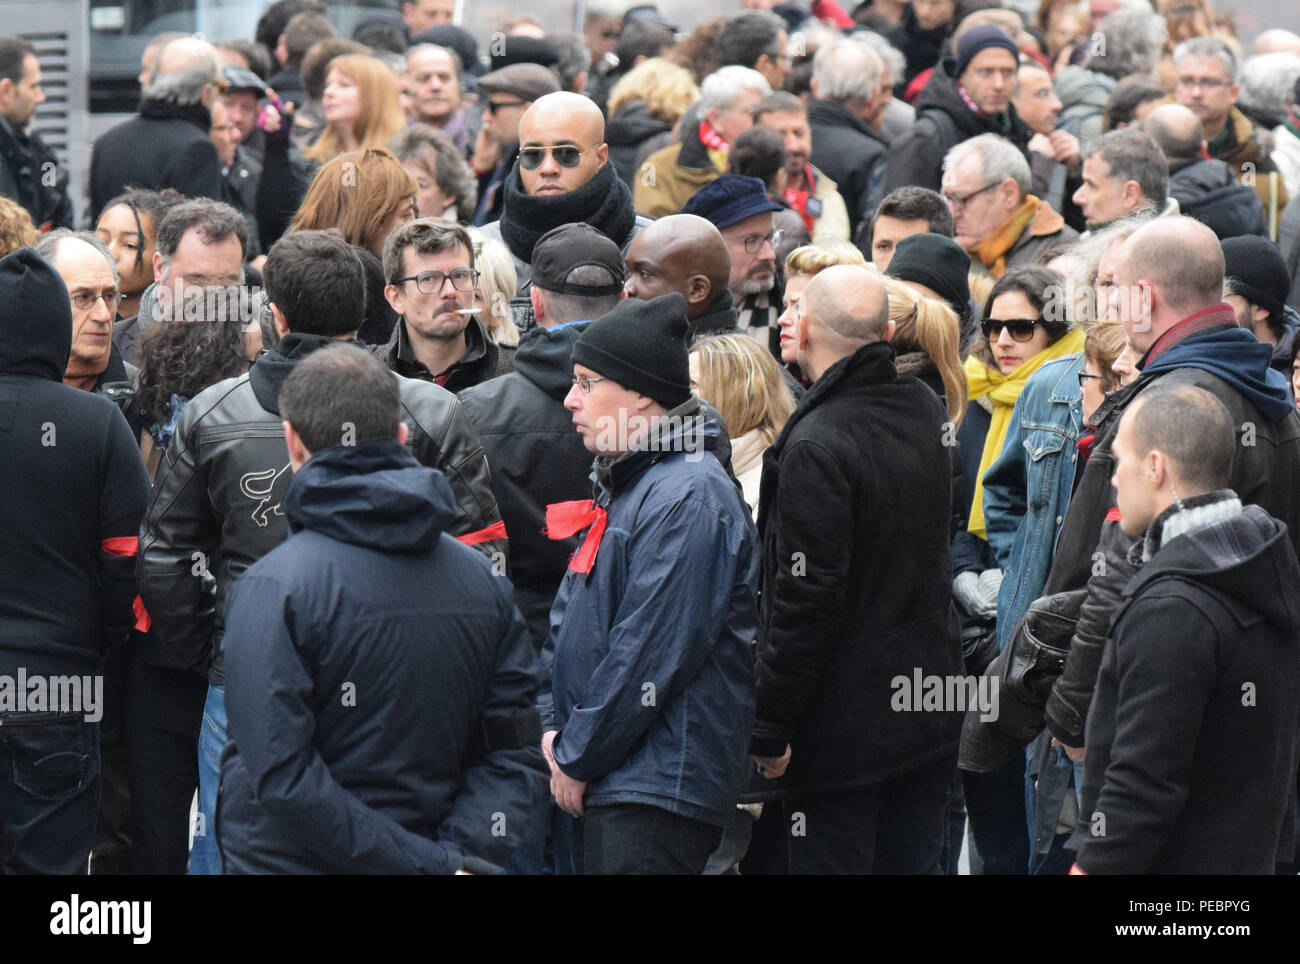 January 11, 2015 - Paris, France:  Family members and close friends of Charlie Hebdo victims, including senior cartoonist Renaud Luzier (known as 'Luz'), attend a mass unity rally following the recent Paris terrorist attacks.  Four million people demonstrated across the country in a 'Marche Republicaine' (Republican March) celebrating the nation's unity in face of terrorist threats. Thousands of people had banners or cartoons referring to Charlie Hebdo, the satirical magazine whose office was targeted by Islamist gunmen earlier in the week. La grande marche republicaine en hommage aux victimes Stock Photo